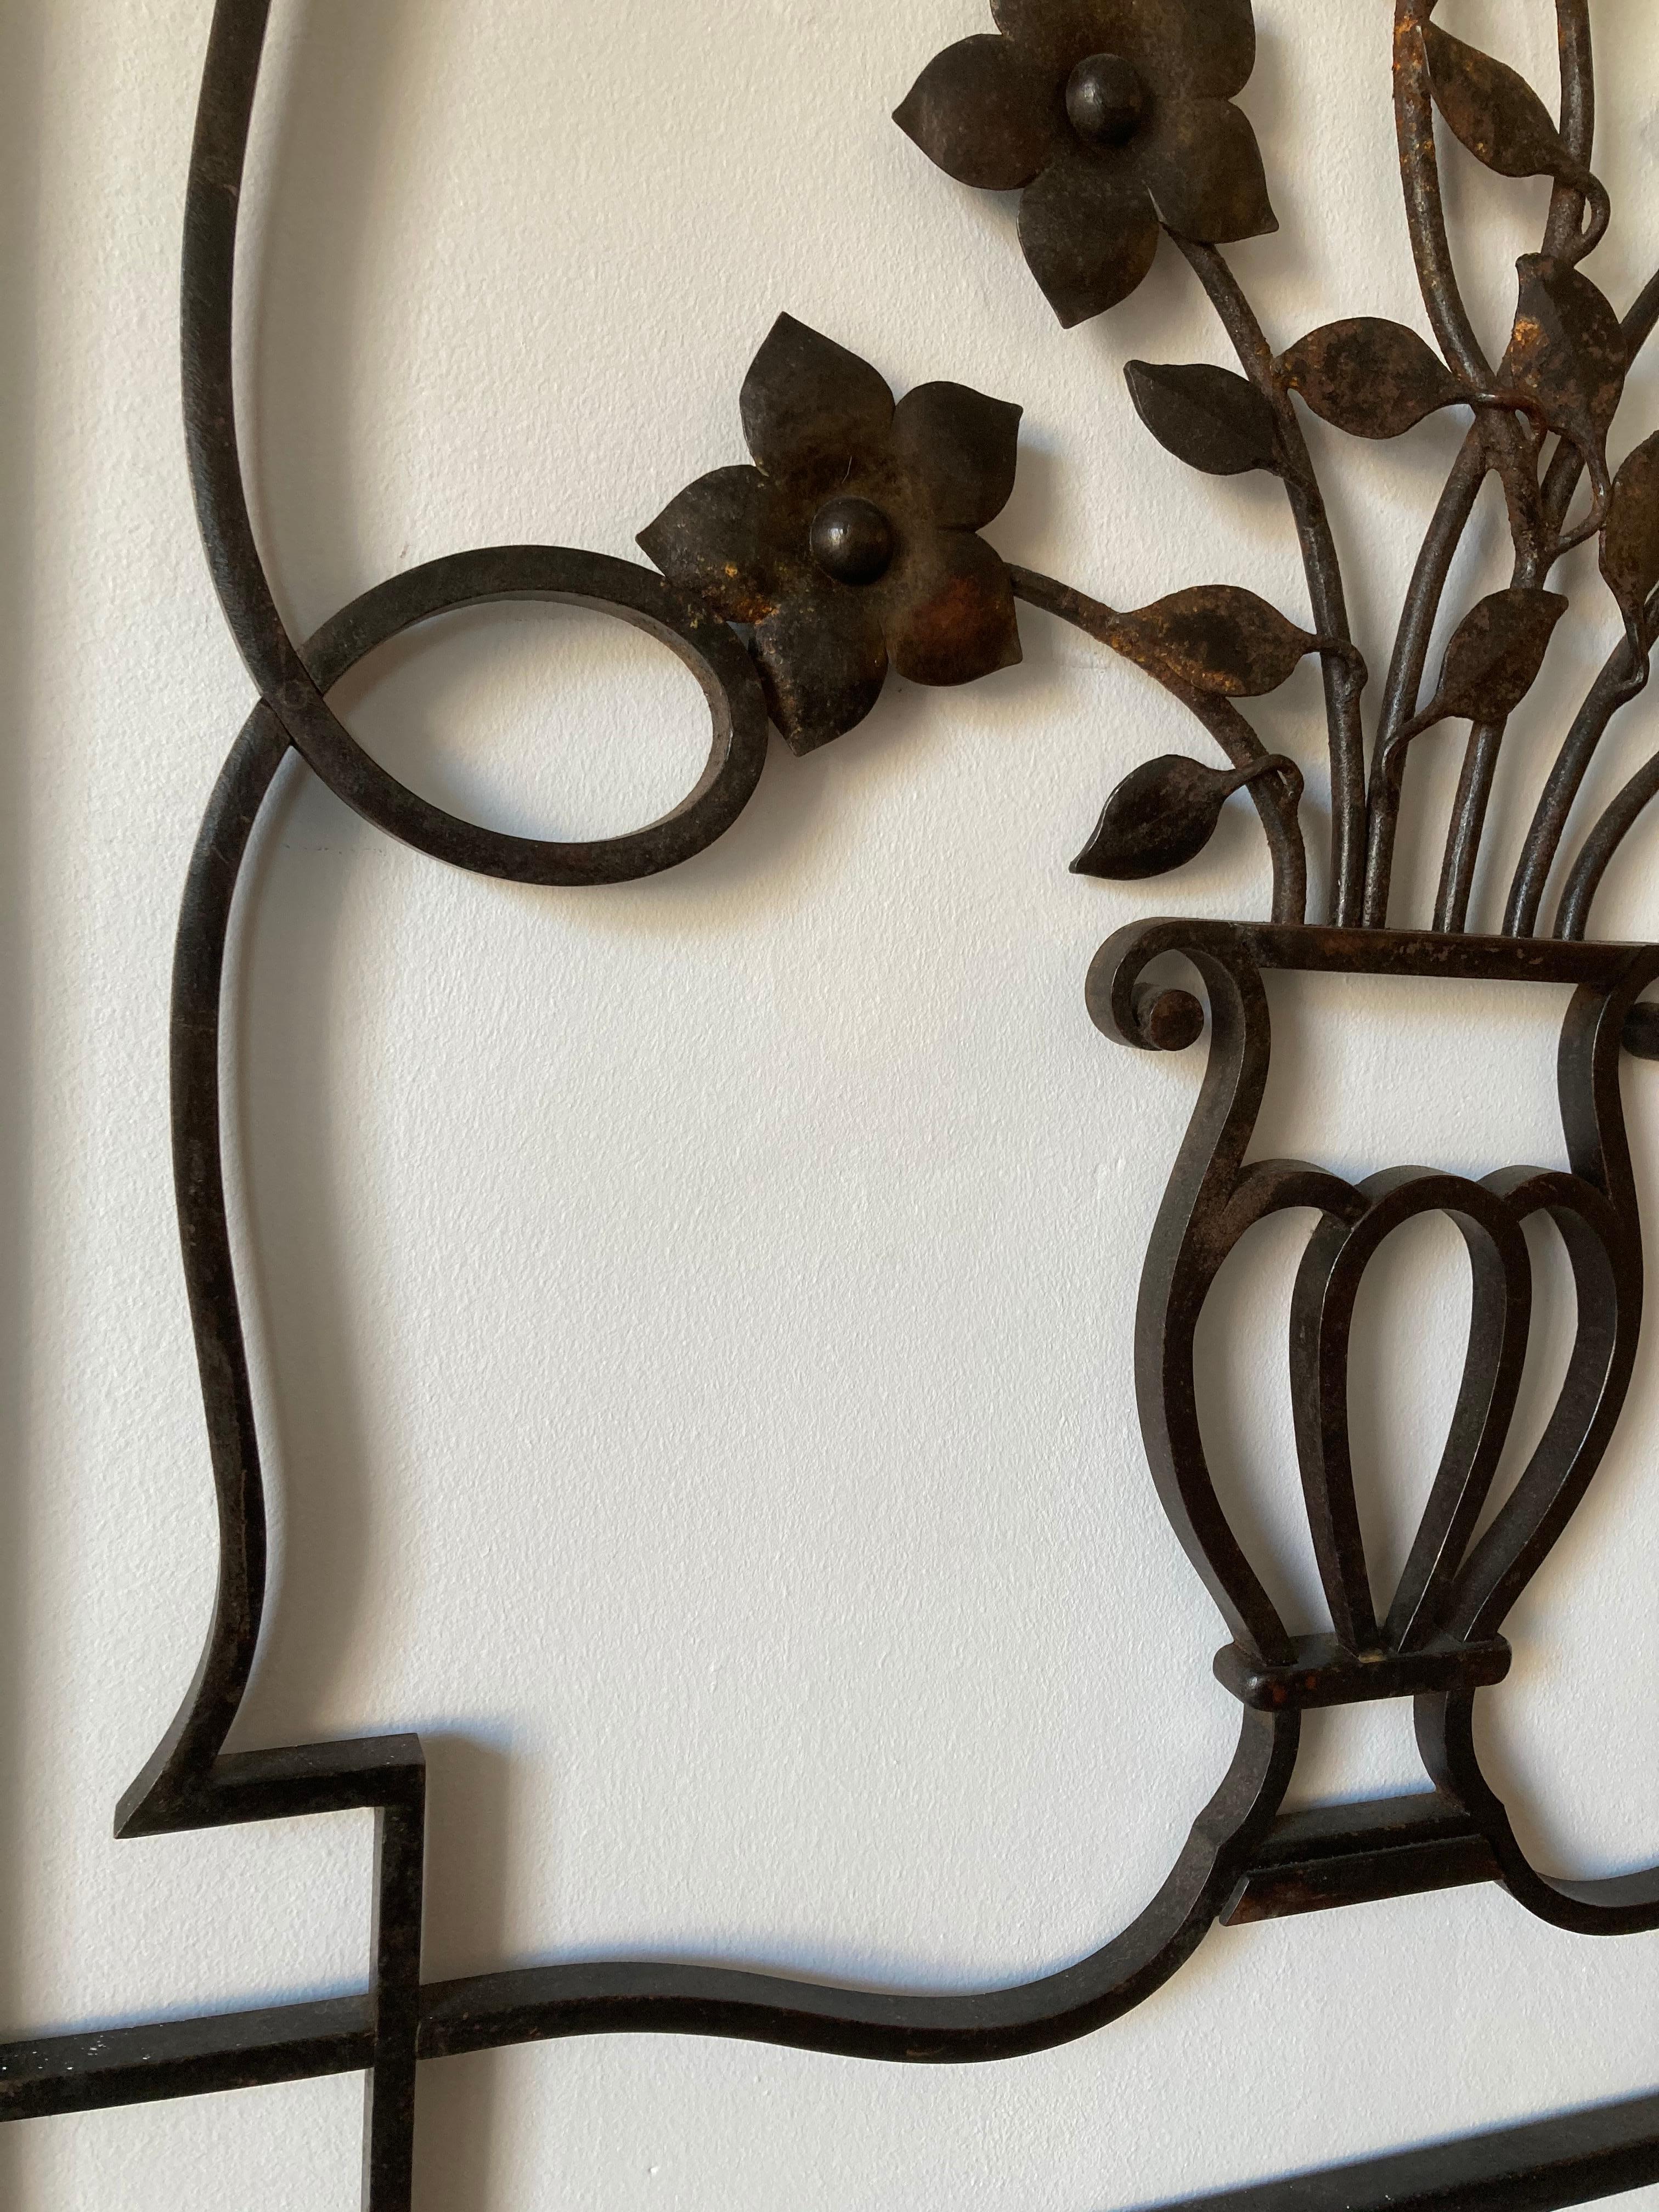 French Decorative Iron Wall Sculpture or Applique, Urn and Floral Motif In Good Condition For Sale In Somerton, GB